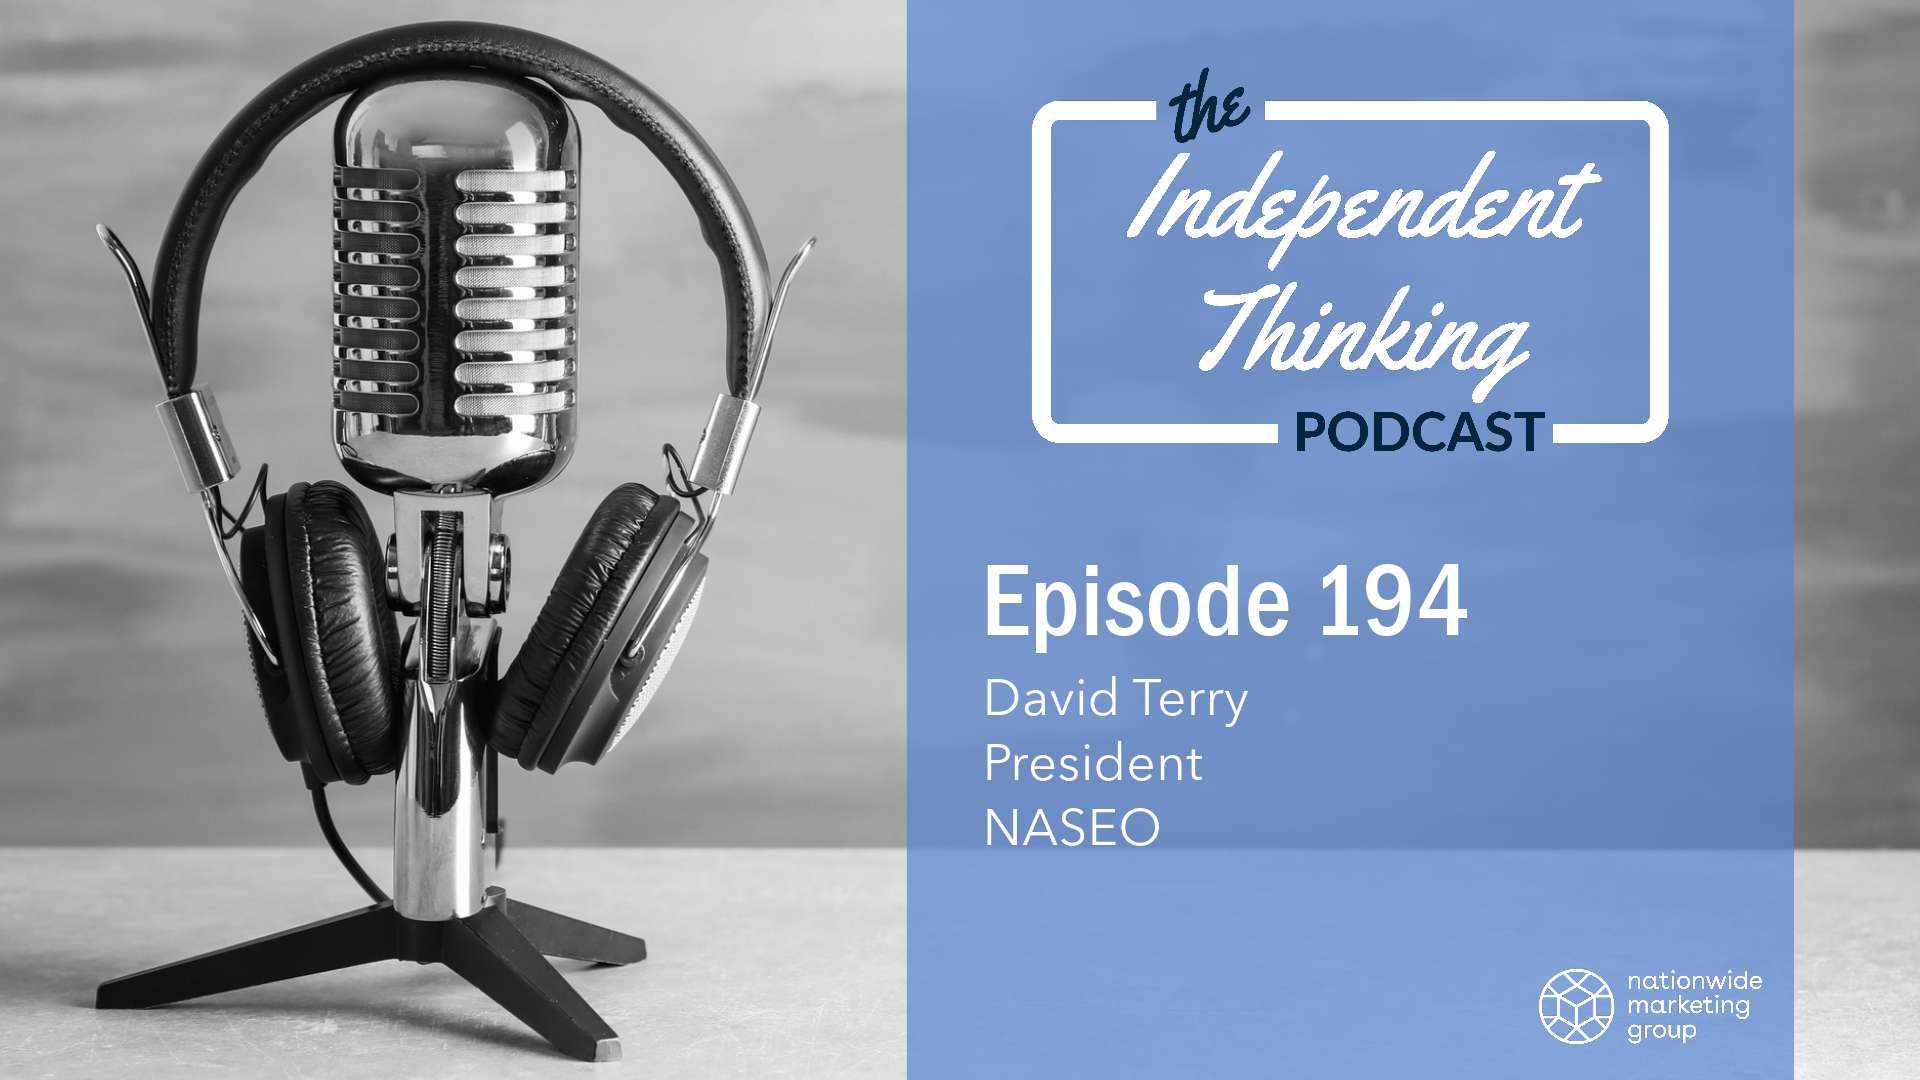 NASEO Independent Thinking Podcast retail inflation reduction act